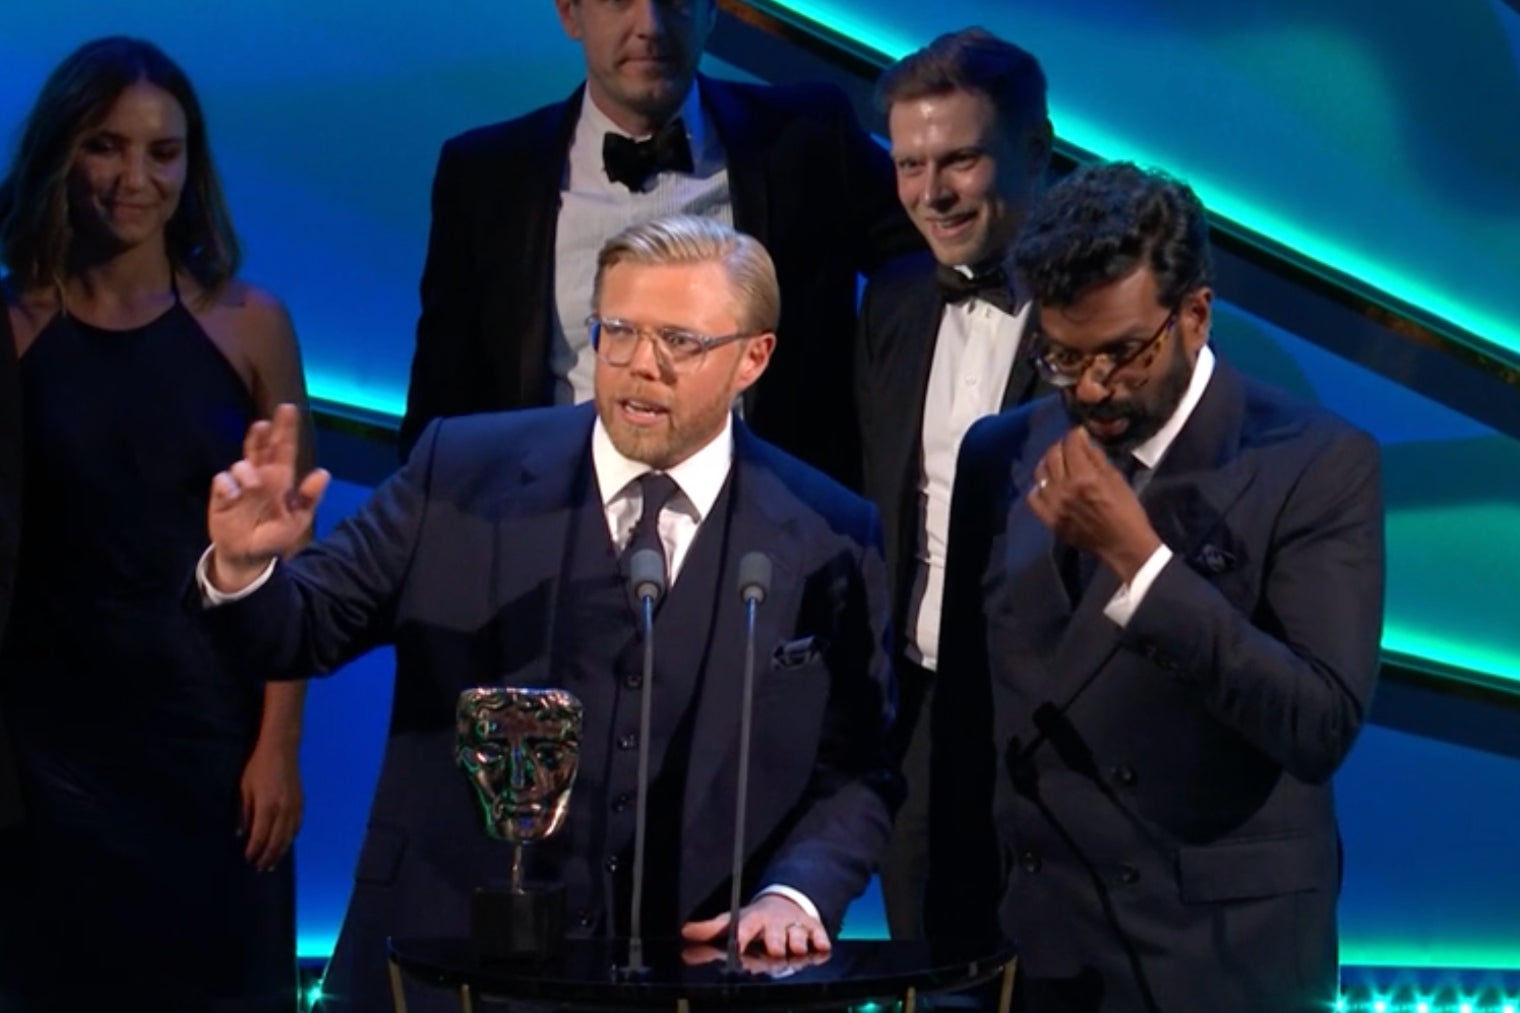 Bafta hosts Rob Beckett and Romesh Ranganathan collect their own Bafta, for Best Comedy Entertainment Programme